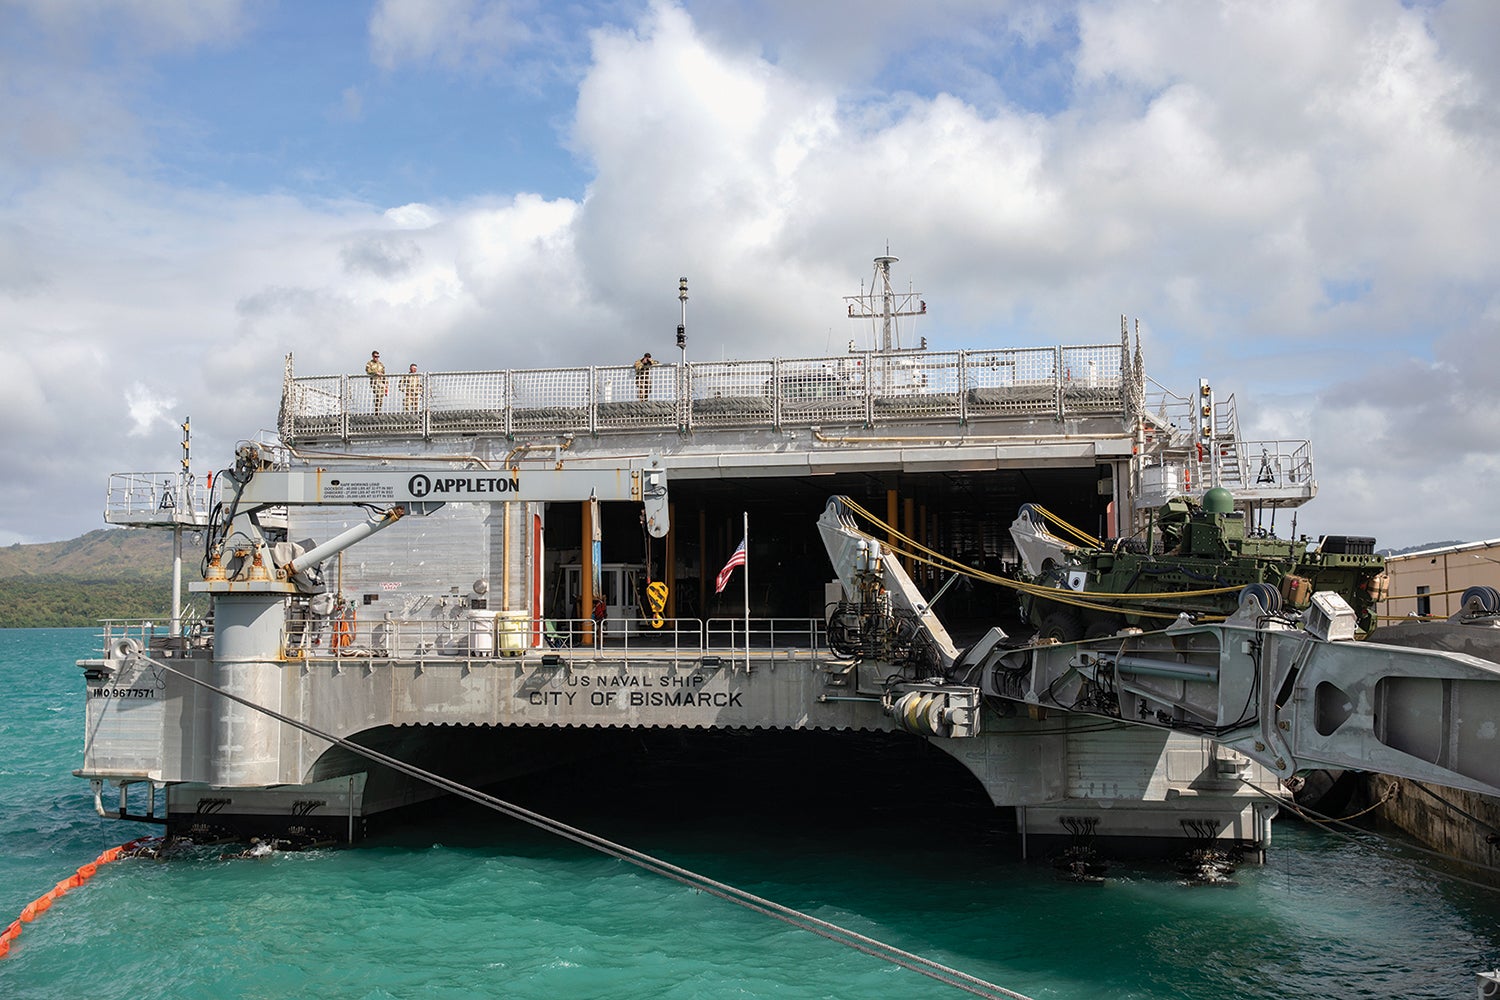 A Stryker combat vehicle is loaded onto the USNS City of Bismarck at Naval Base Guam. (Credit: U.S. Army/Spc. Jailene Bautista)